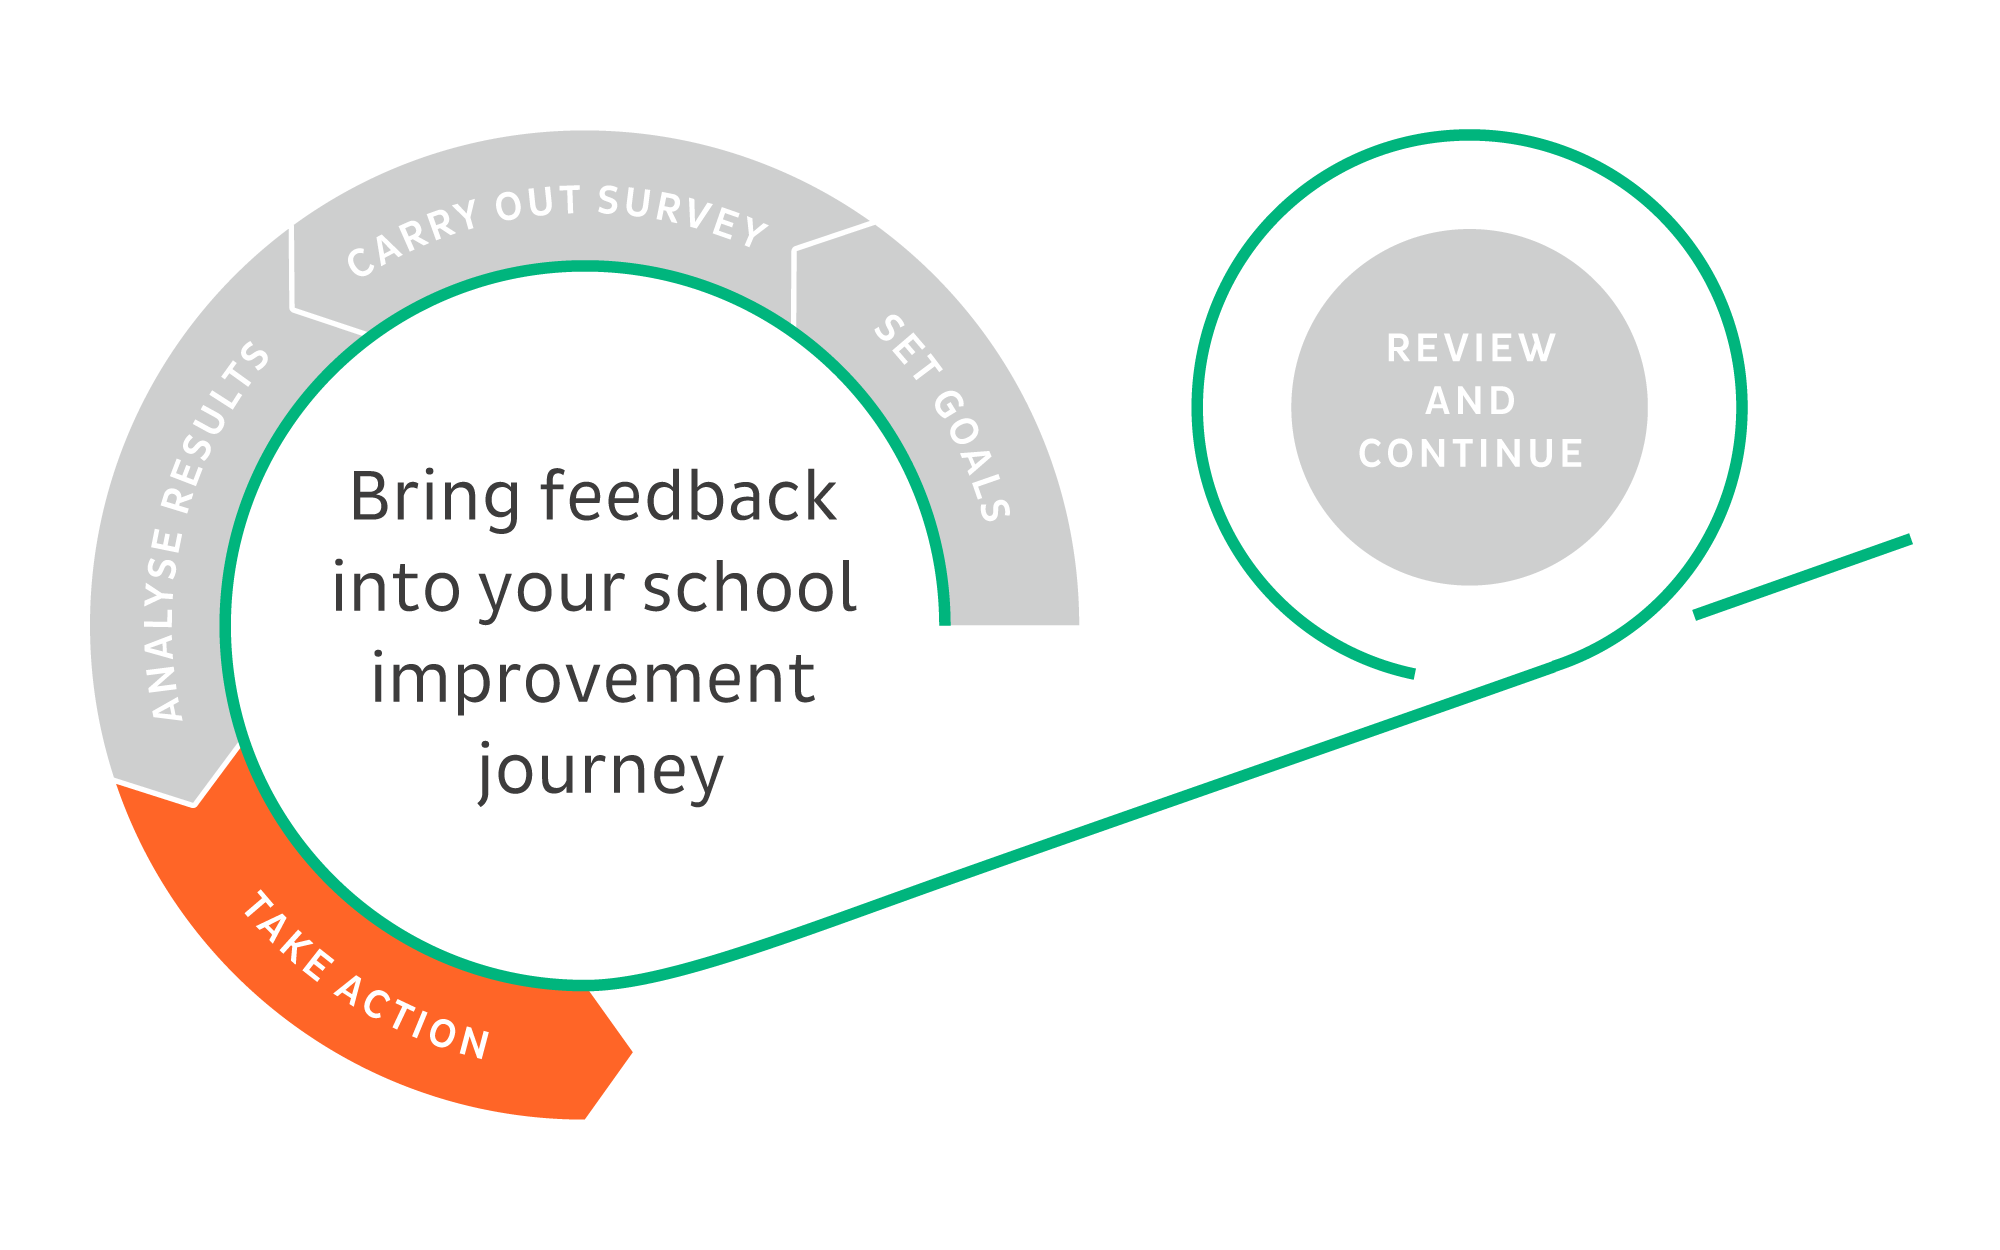 Cycle-circle visualisation_bring feedback into your school improvement journey (take action)